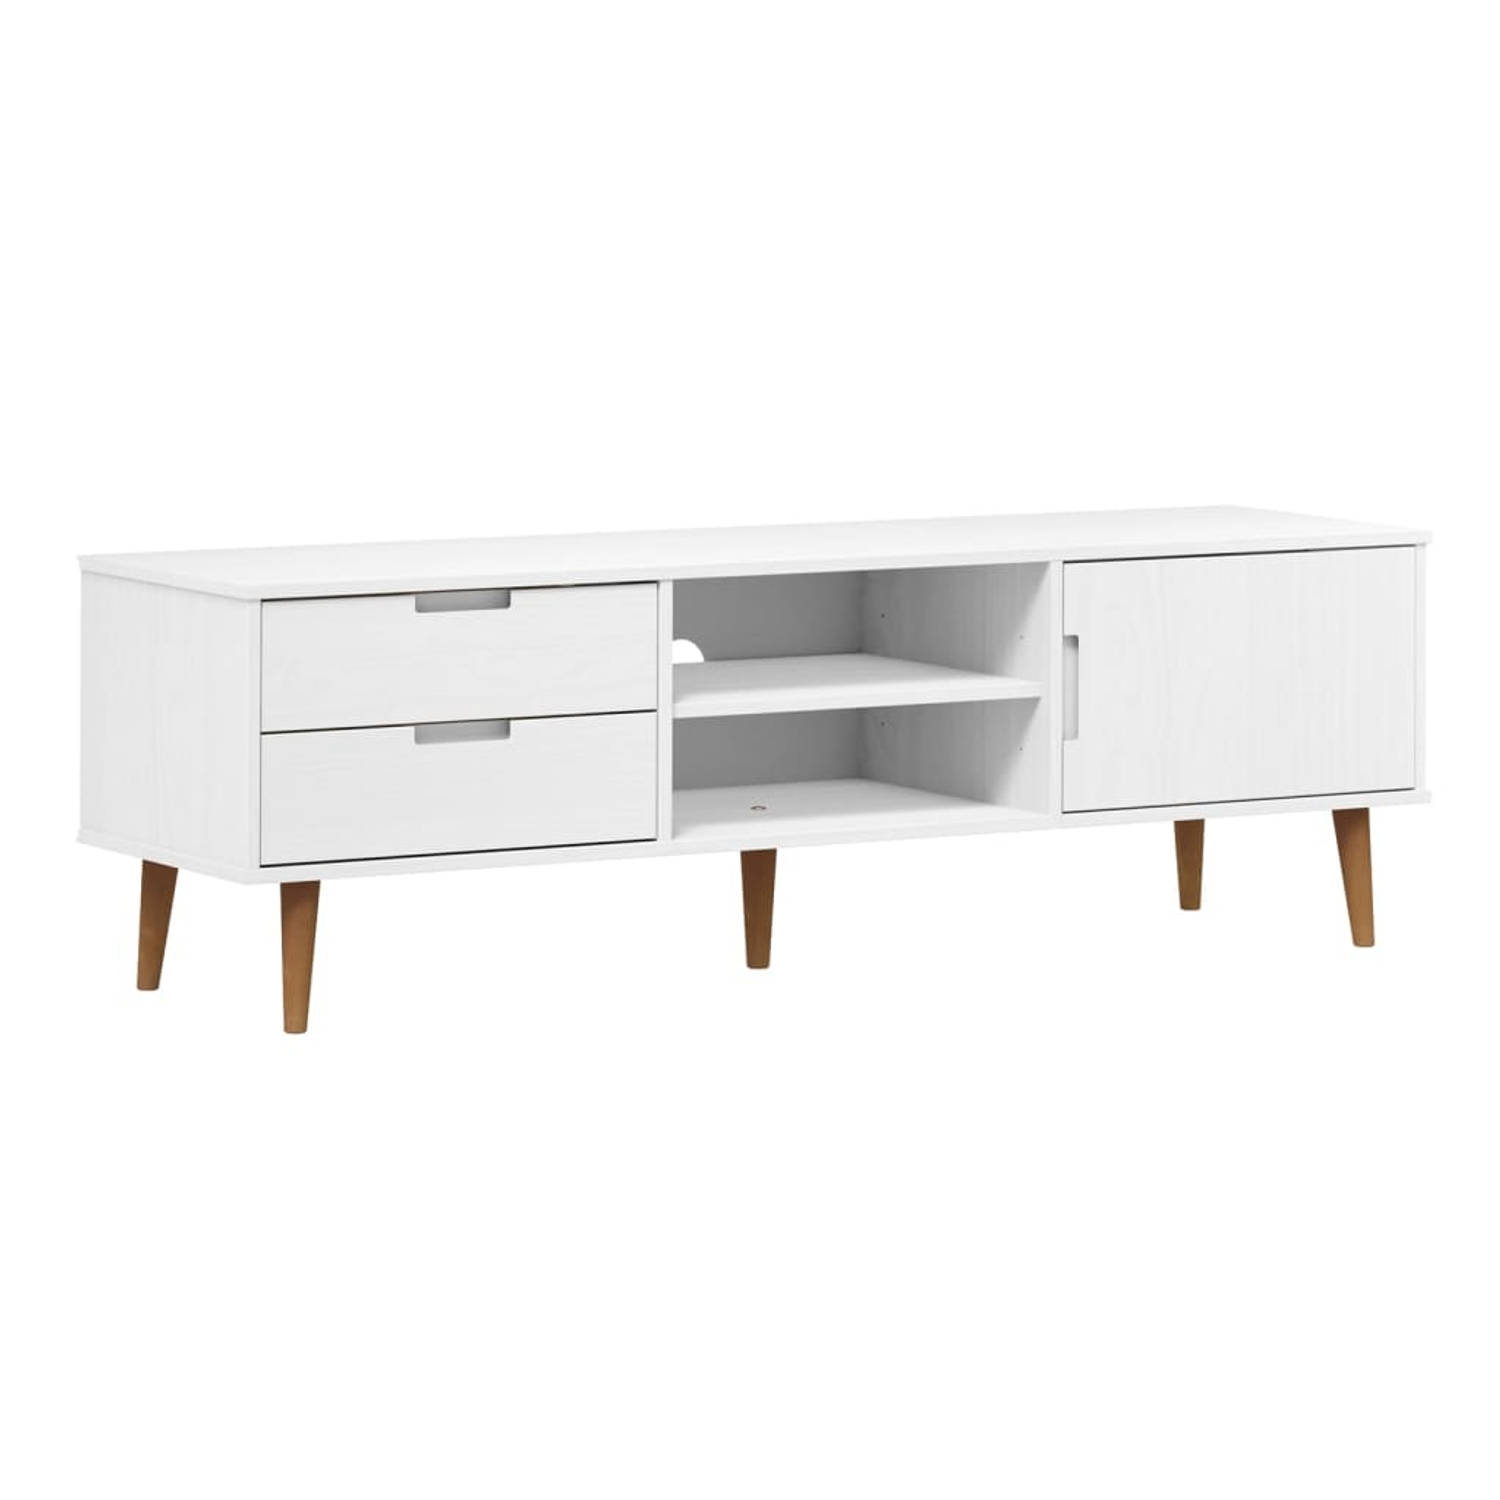 The Living Store MOLDE Tv-kast 158x40x49 cm Wit Massief grenenhout